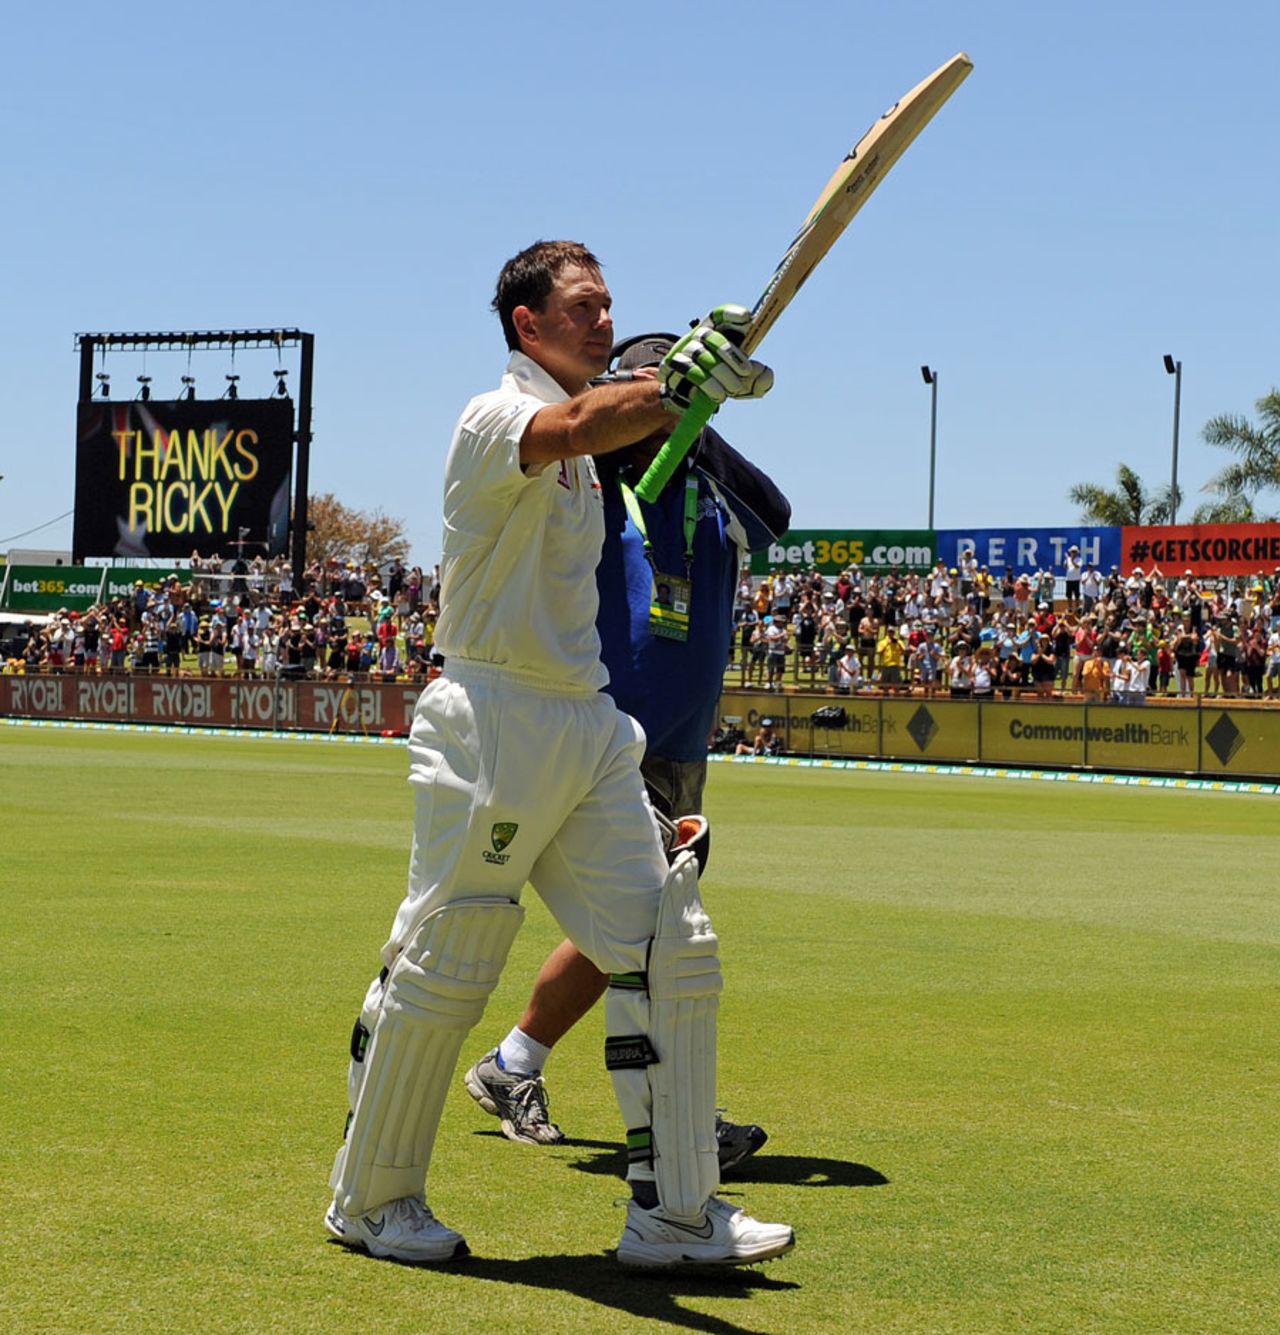 The scoreboard says it all: "Thanks Ricky", Australia v South Africa, 3rd Test, Perth, 4th day, December 3, 2012